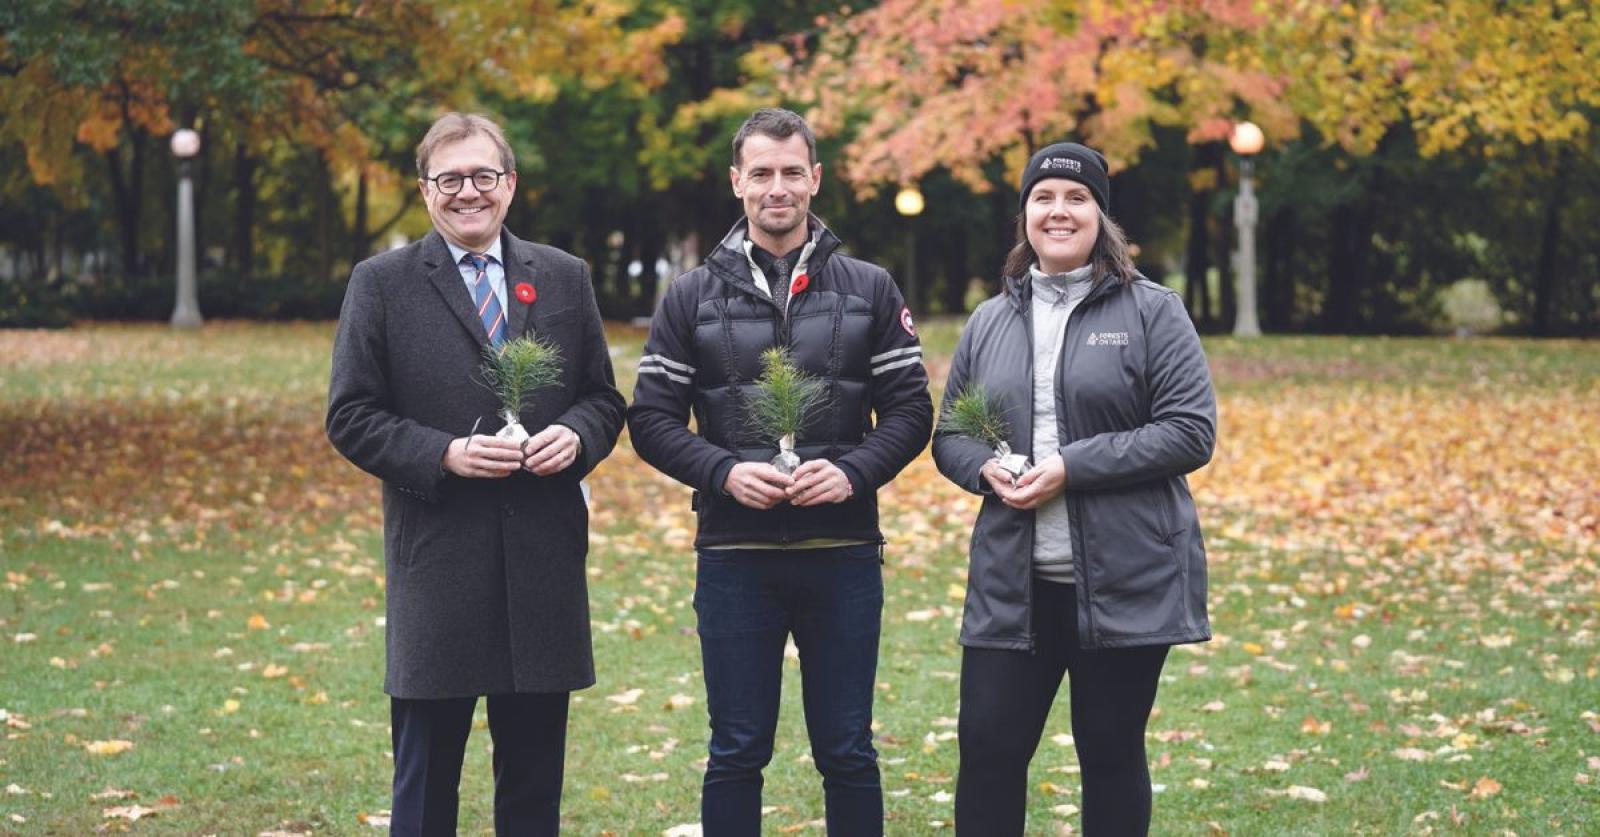 Pictured (left to right): The Honourable Jonathan Wilkinson, minister of energy and natural resources; Member of Parliament Adam van Koeverden, parliamentary secretary to the minister of environment and climate change and to the minister of sport and physical activity; and Jess Kaknevicius, CEO, Forests Ontario.